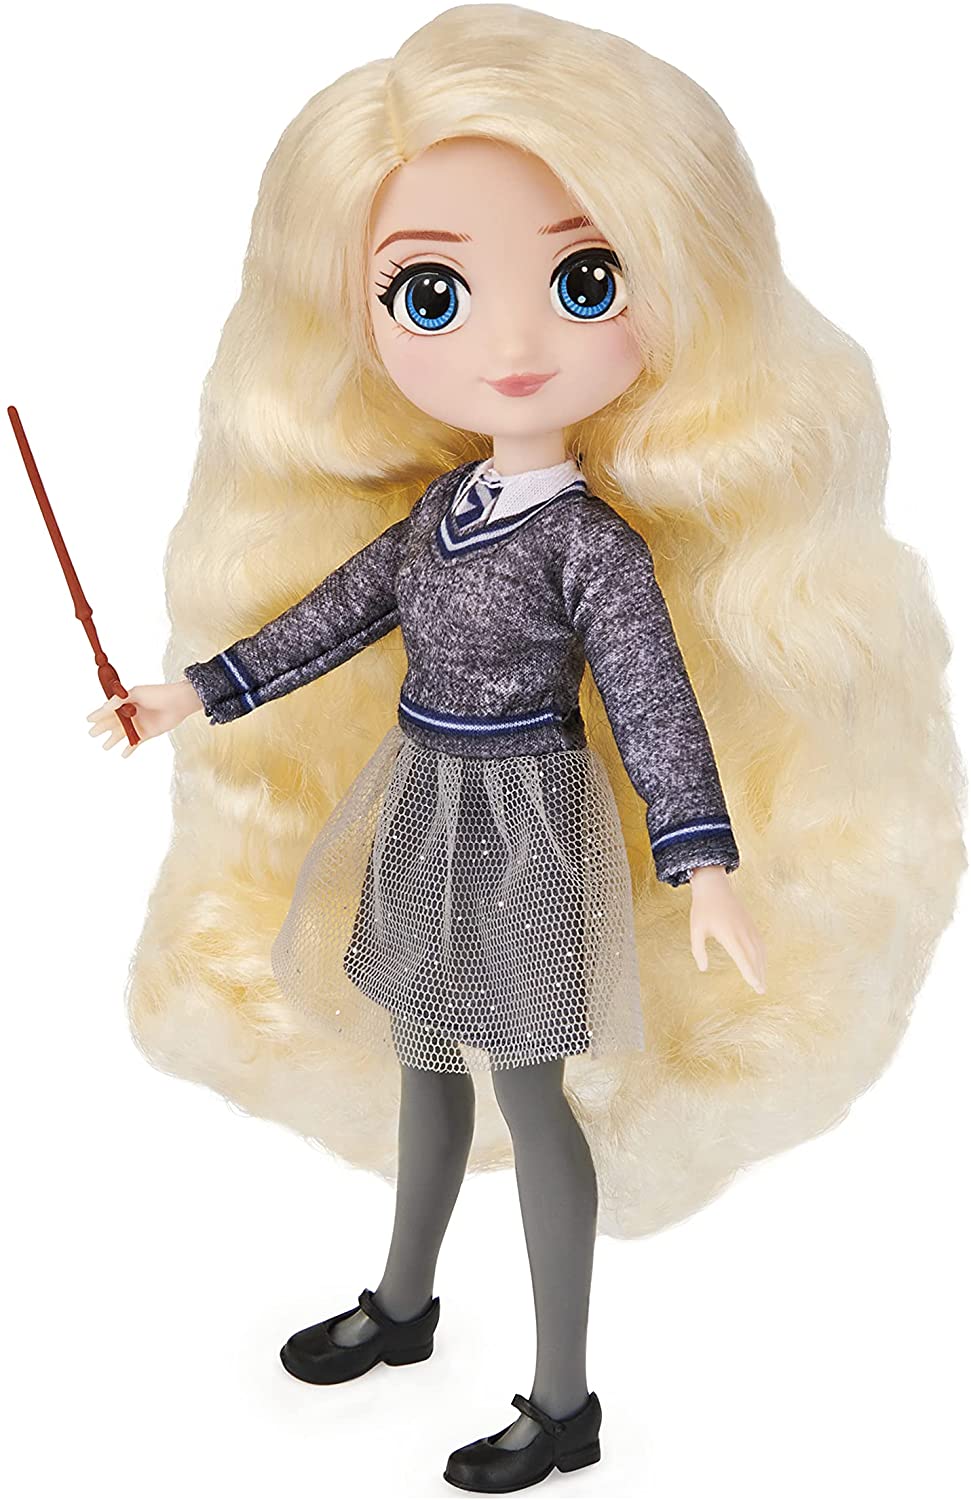 Wizarding World 8-inch Luna Lovegood Doll, Kids Toys for Girls Ages 5 and up